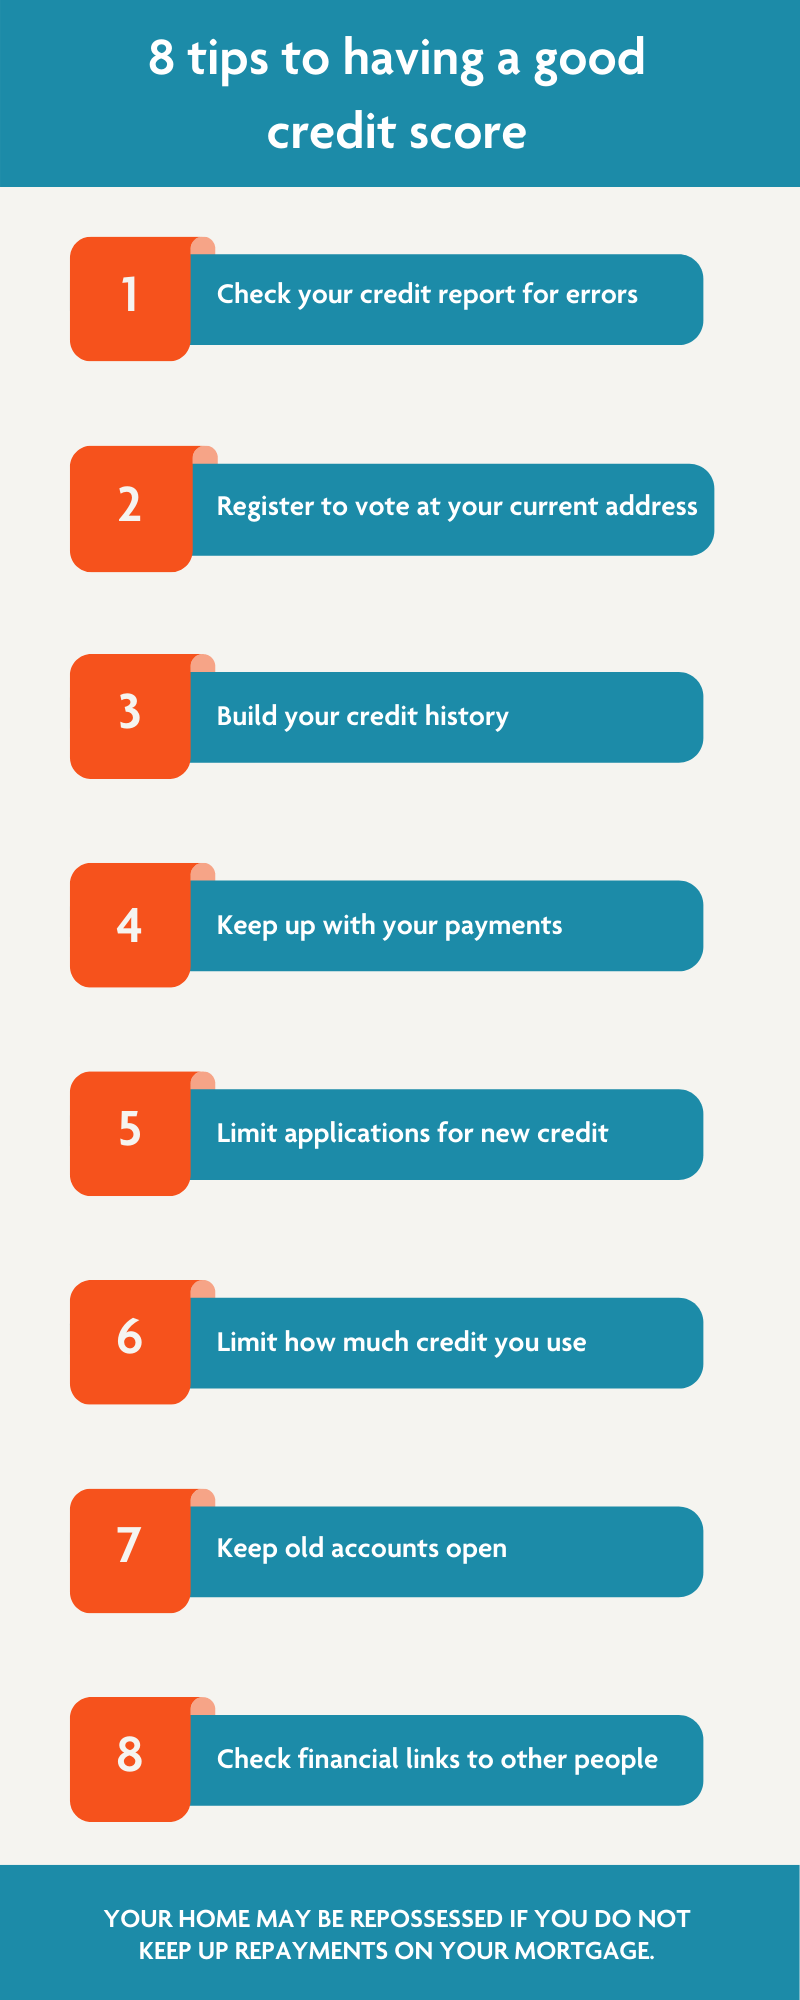 Tips-for-having-a-good-credit-score.png